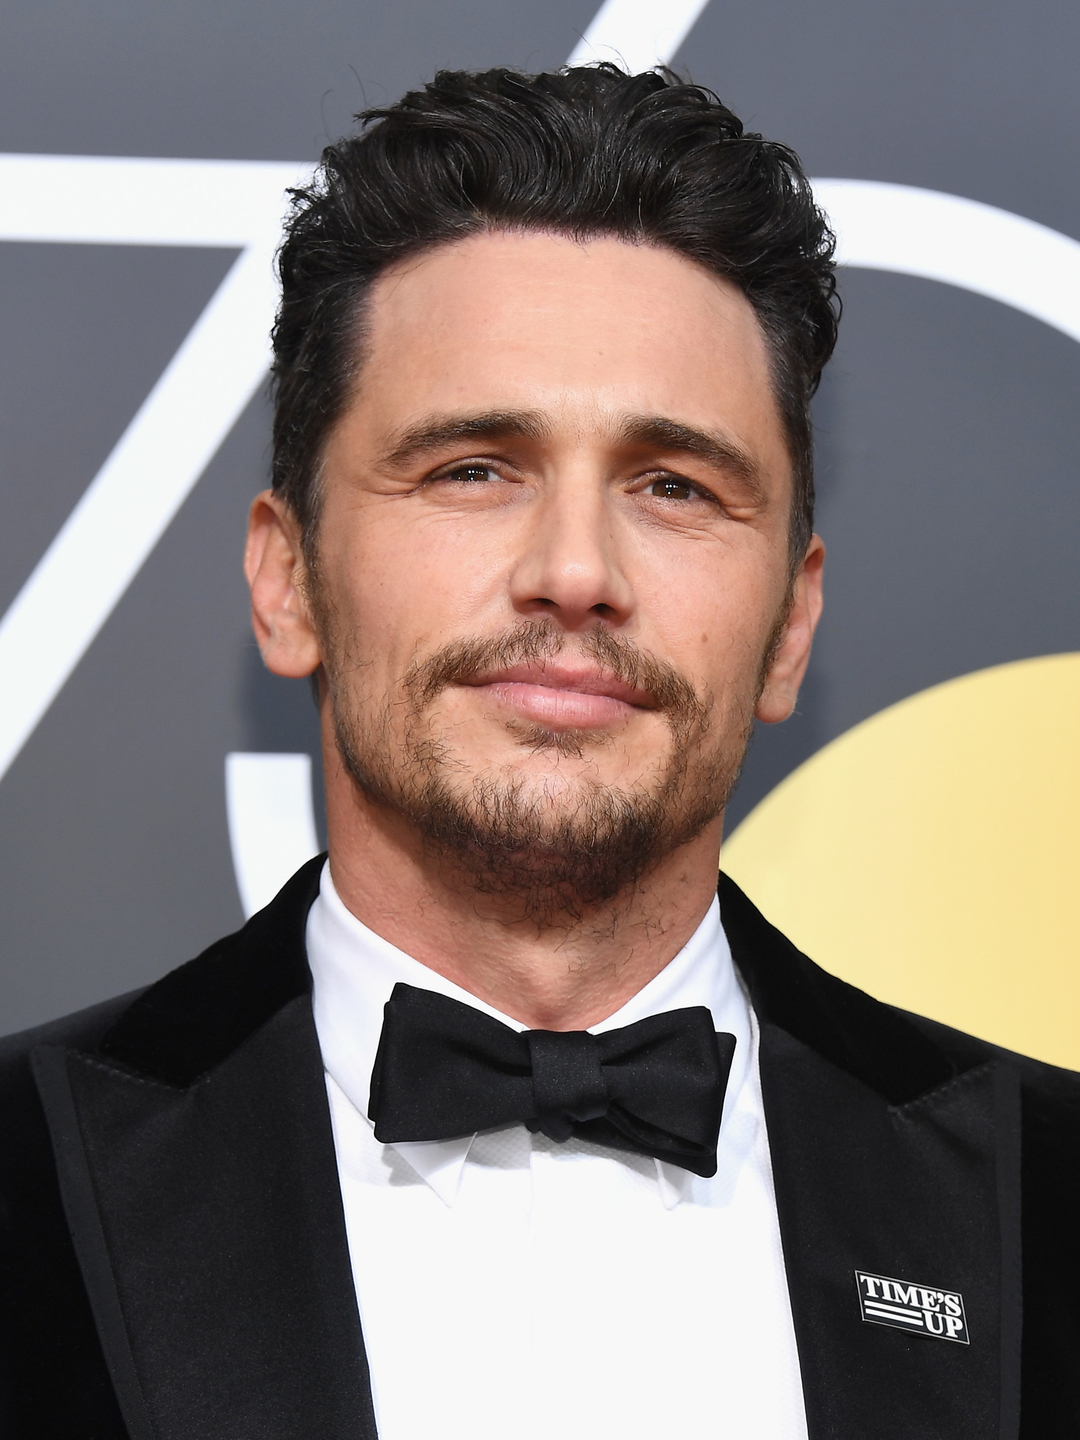 James Franco who is his father